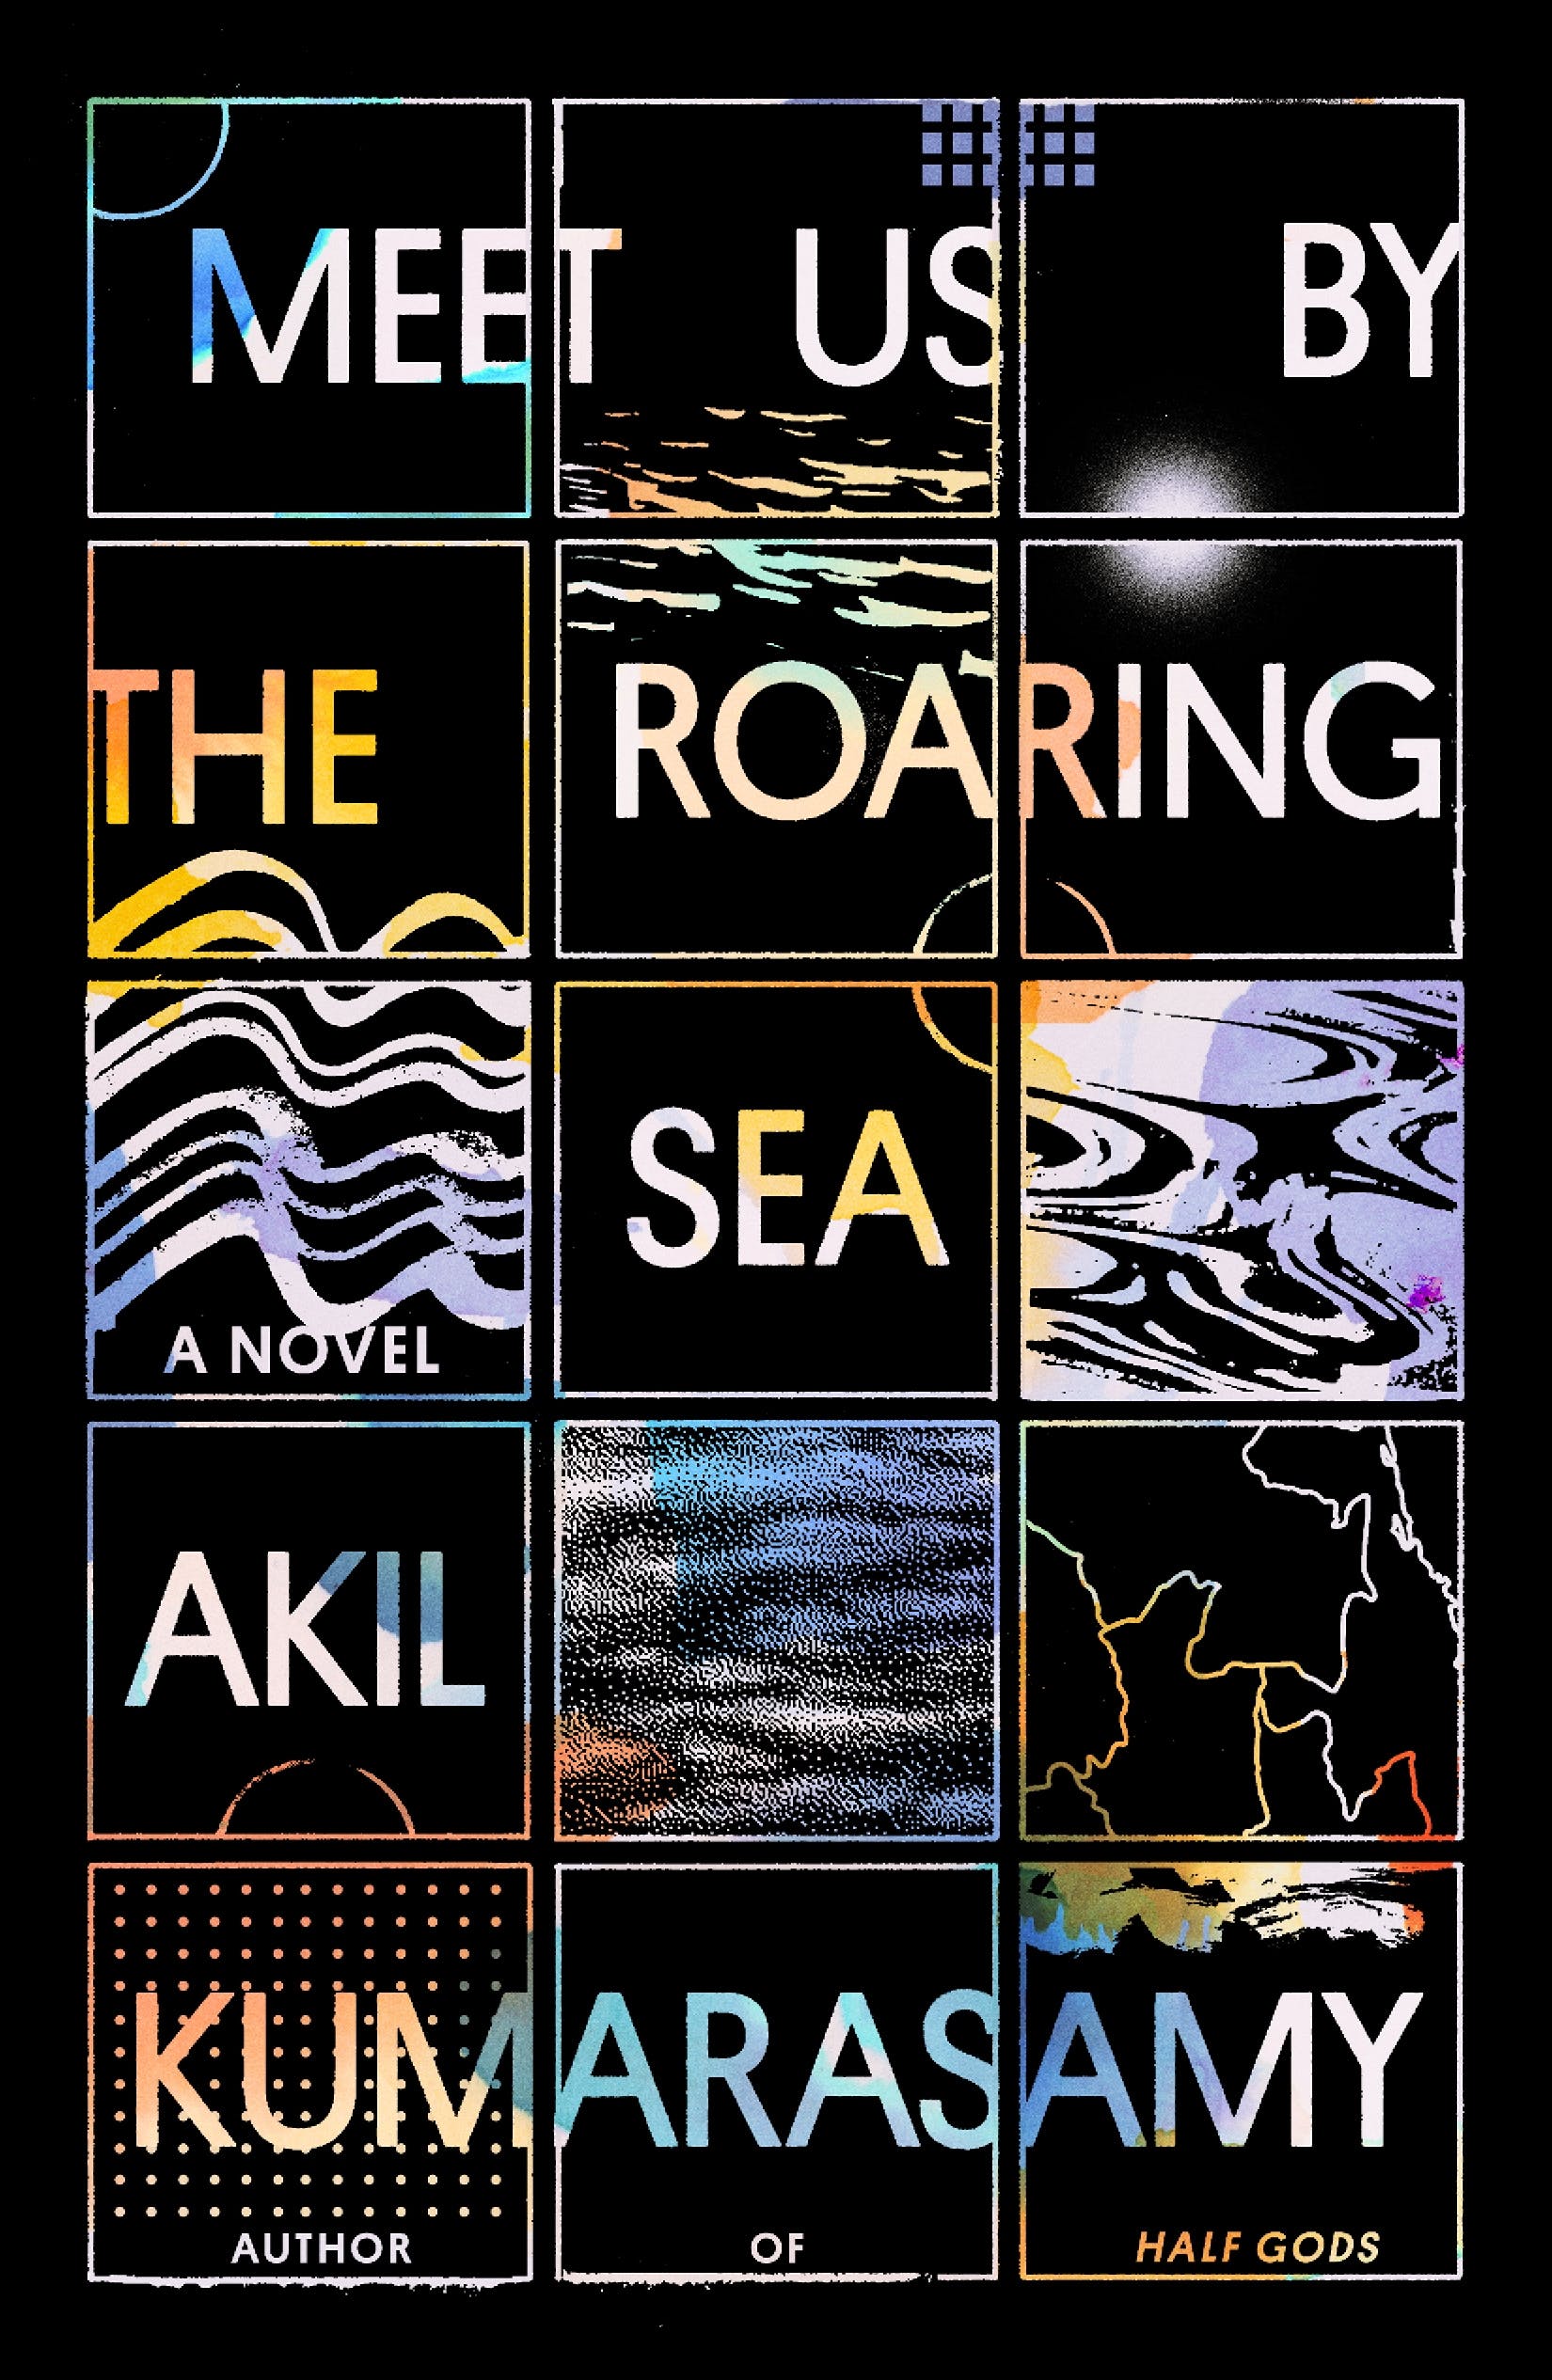 Book Cover of Meet Us by the Roaring Sea by Akil Kumarasamy. Abstract drawings on black background.